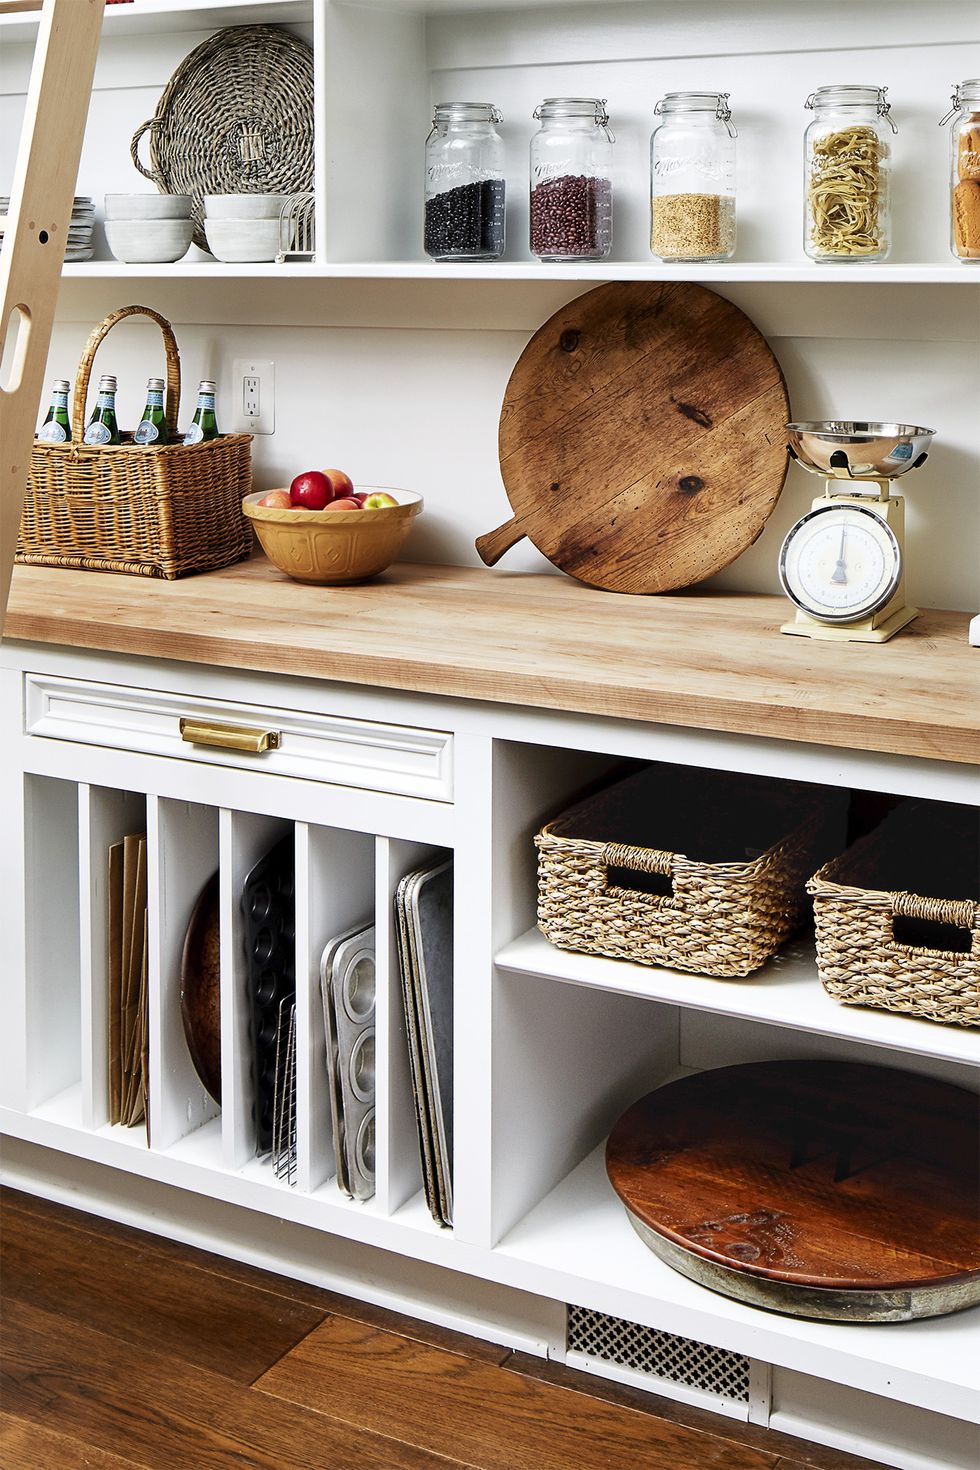 To liberate your pantry, try these professional organizing tips